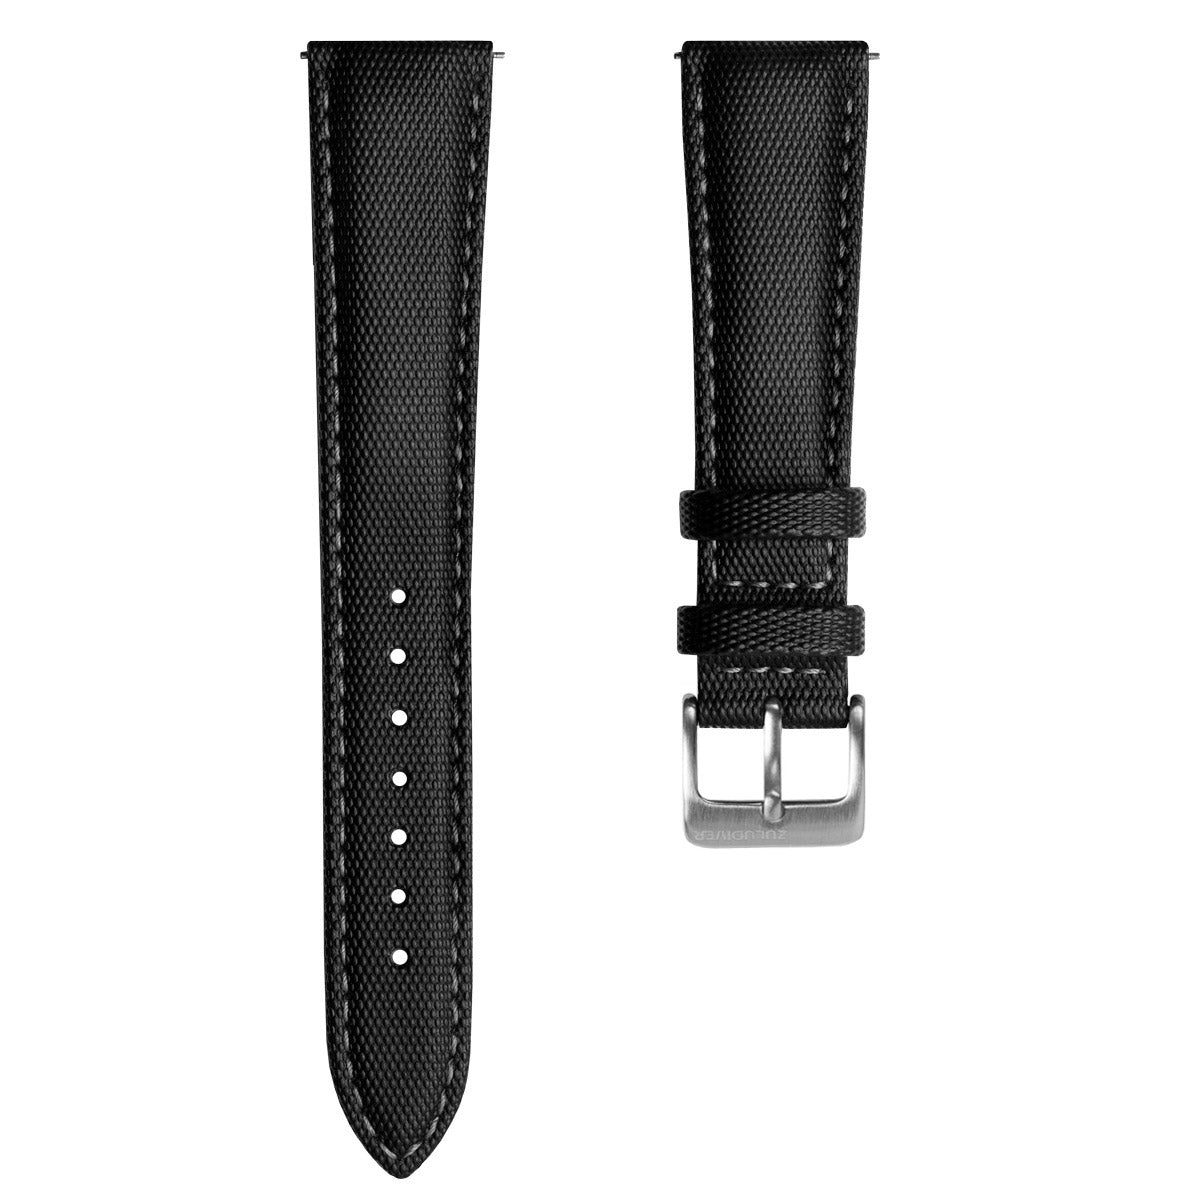 ZULUDIVER Quick Release Sailcloth Padded Divers Watch Strap